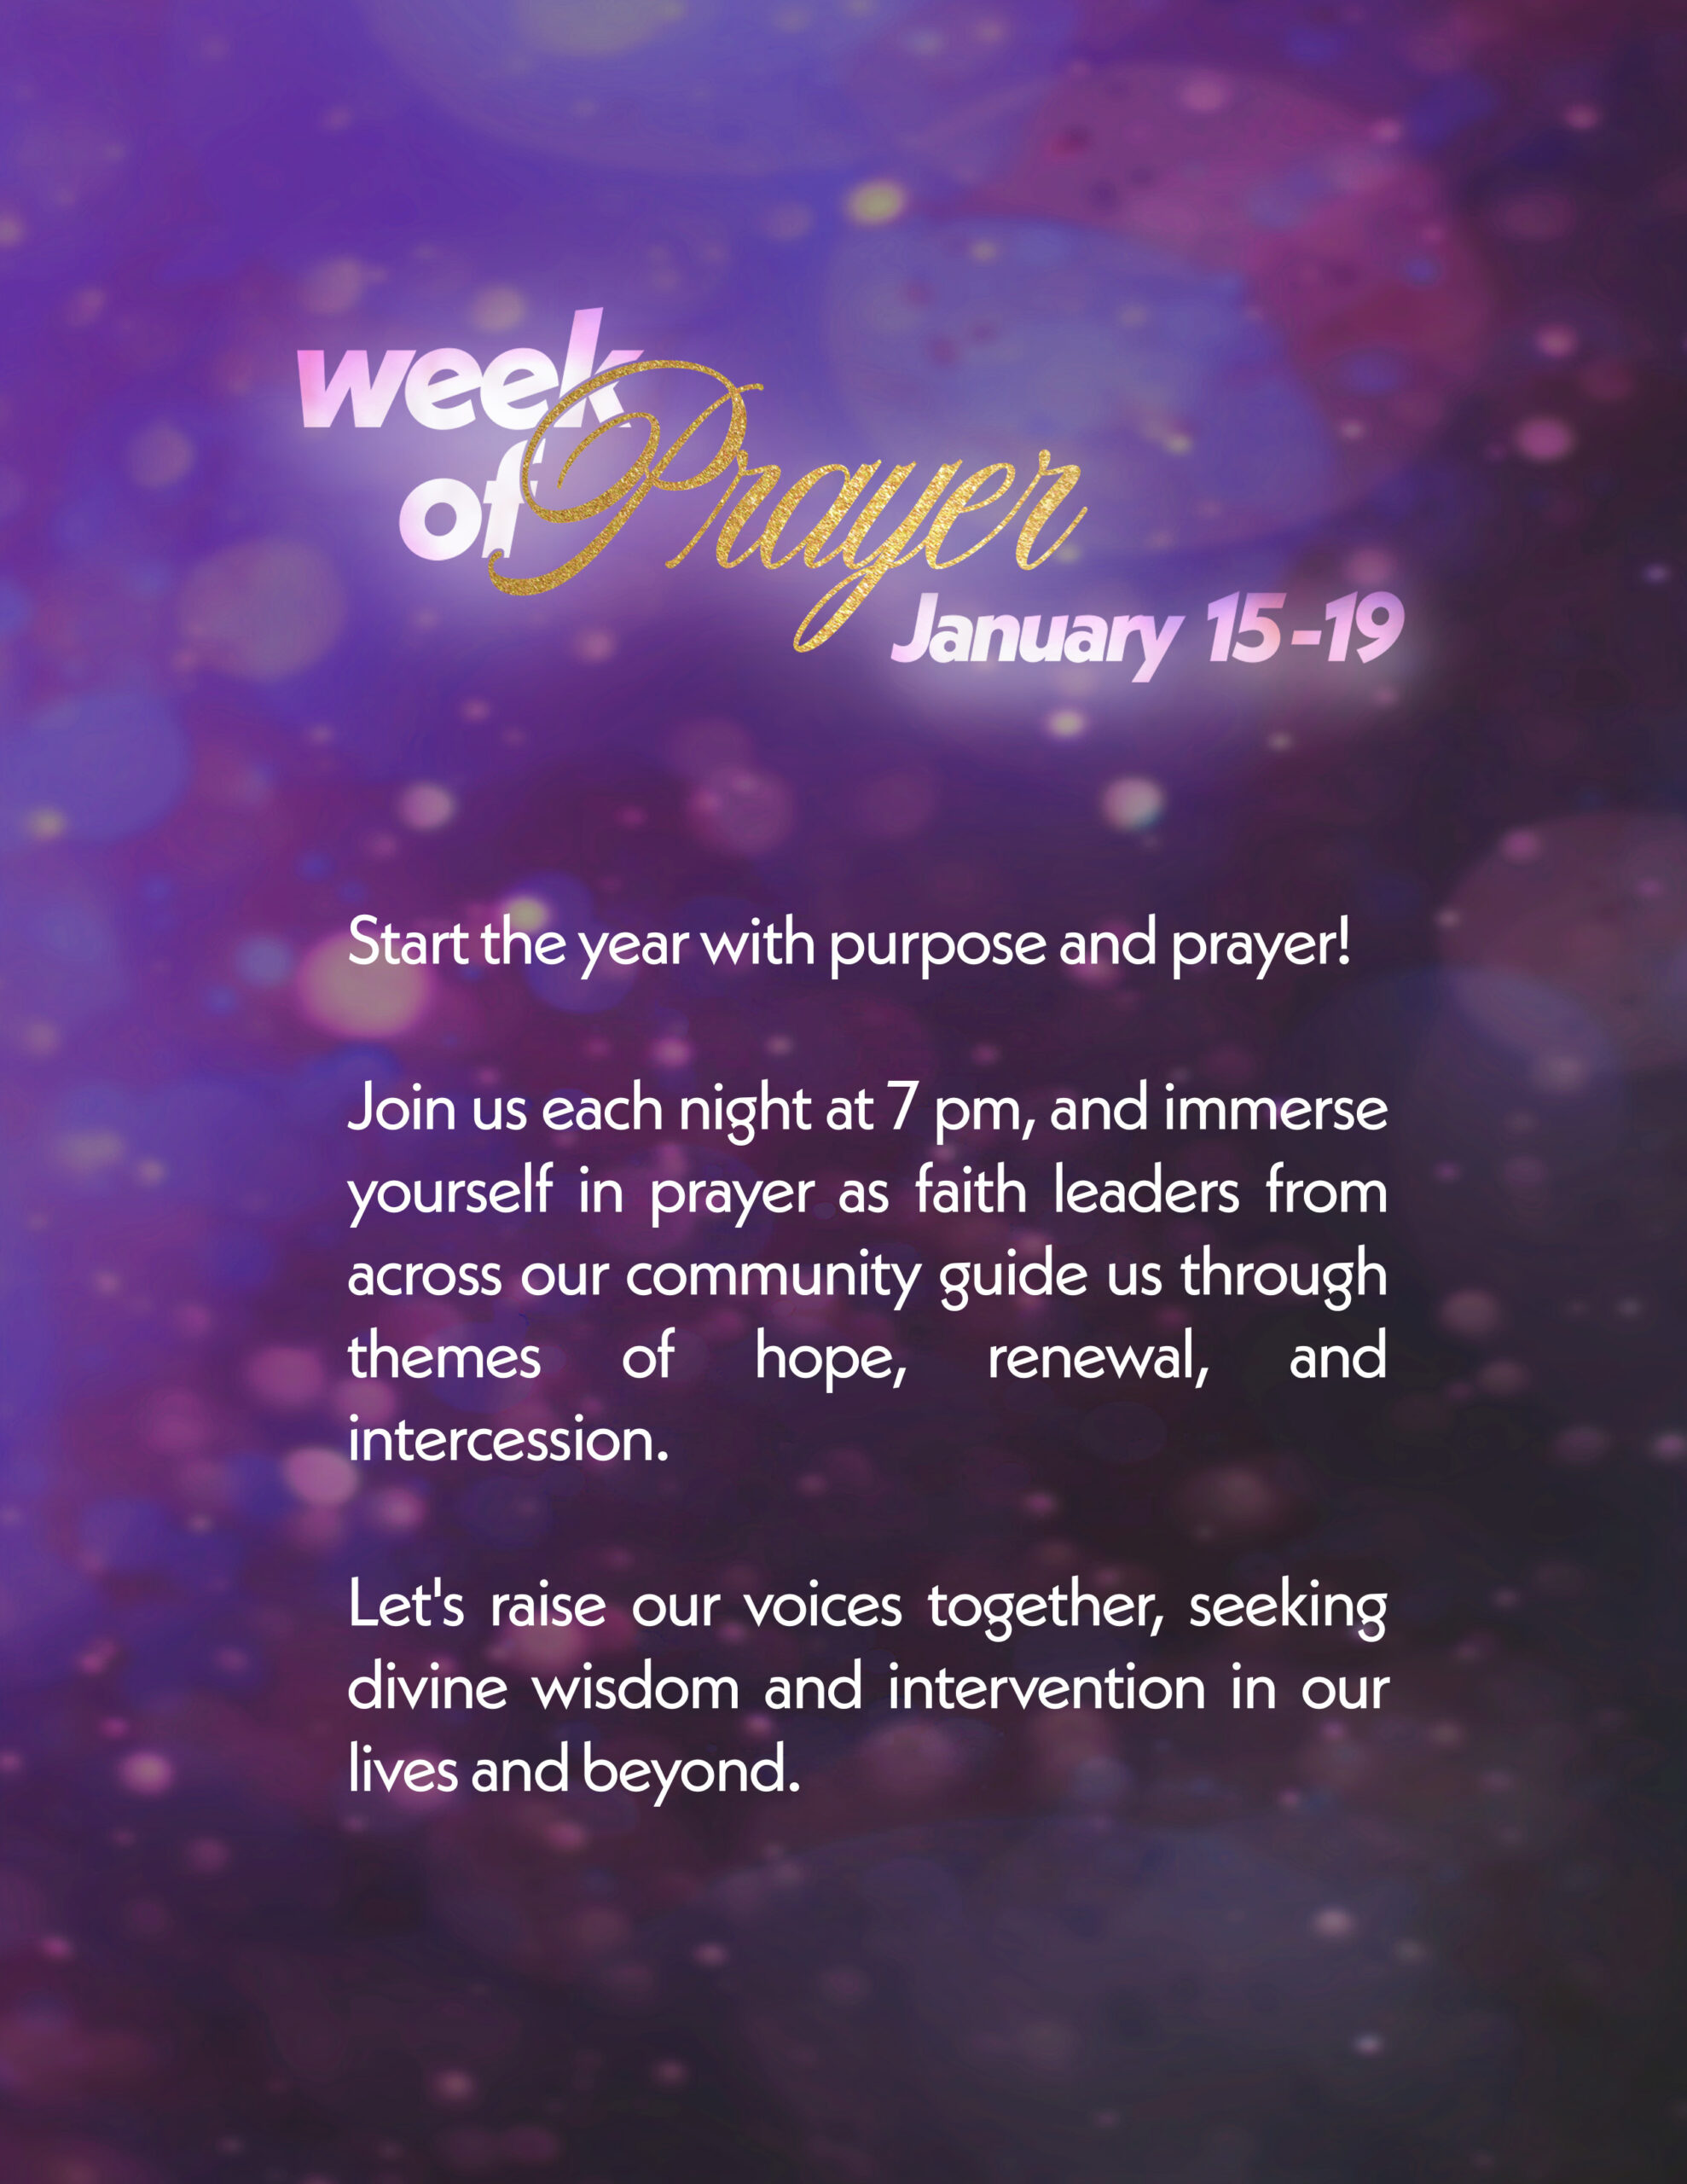 About the week of Prayer